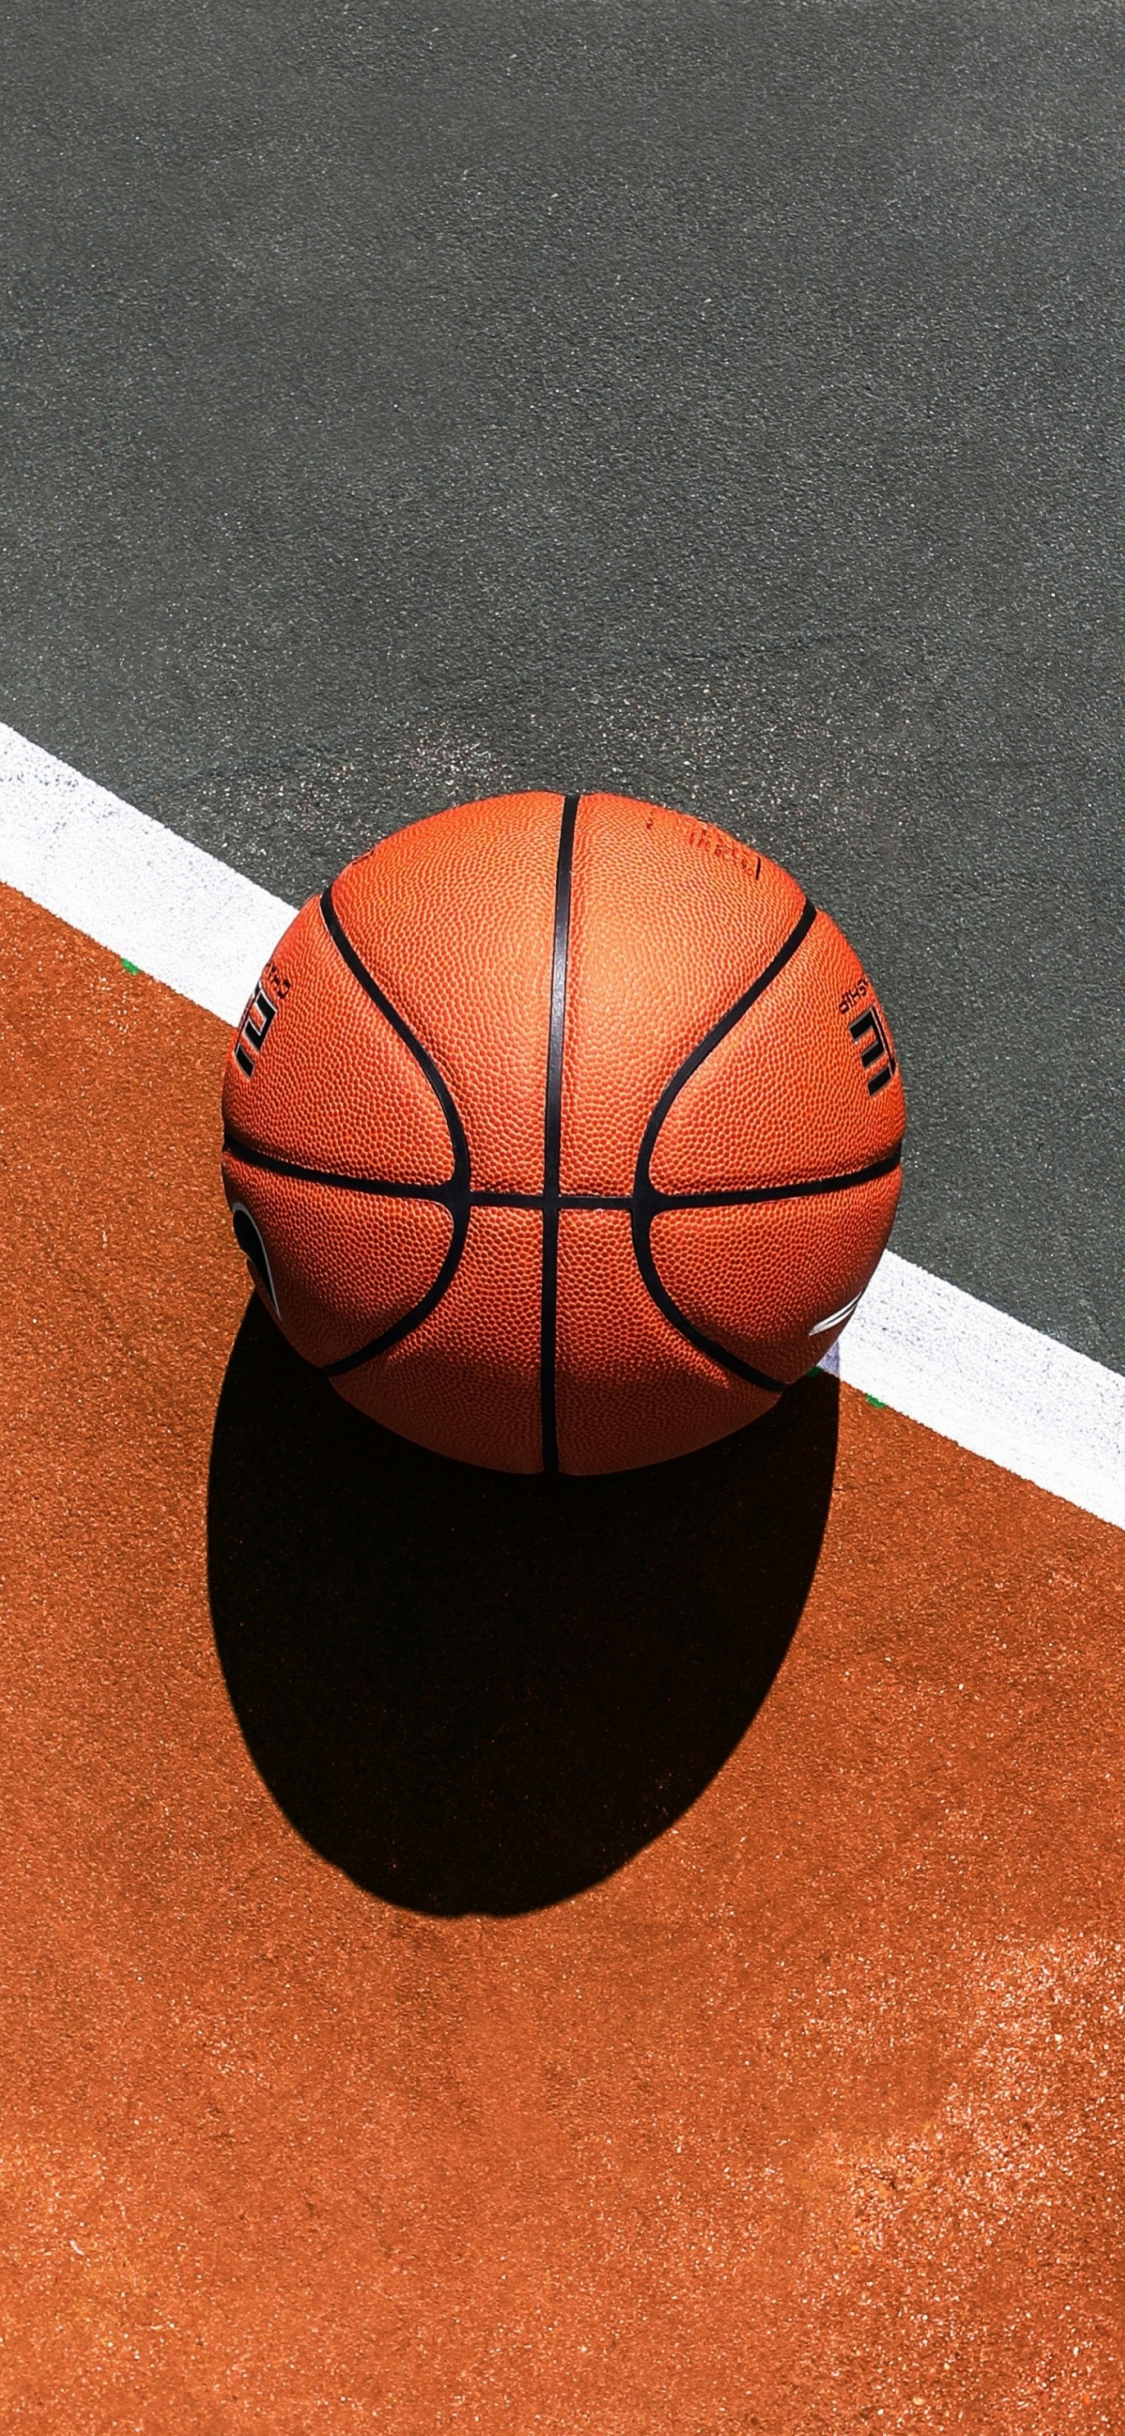 Free Basketball Backgrounds  Wallpaper Cave